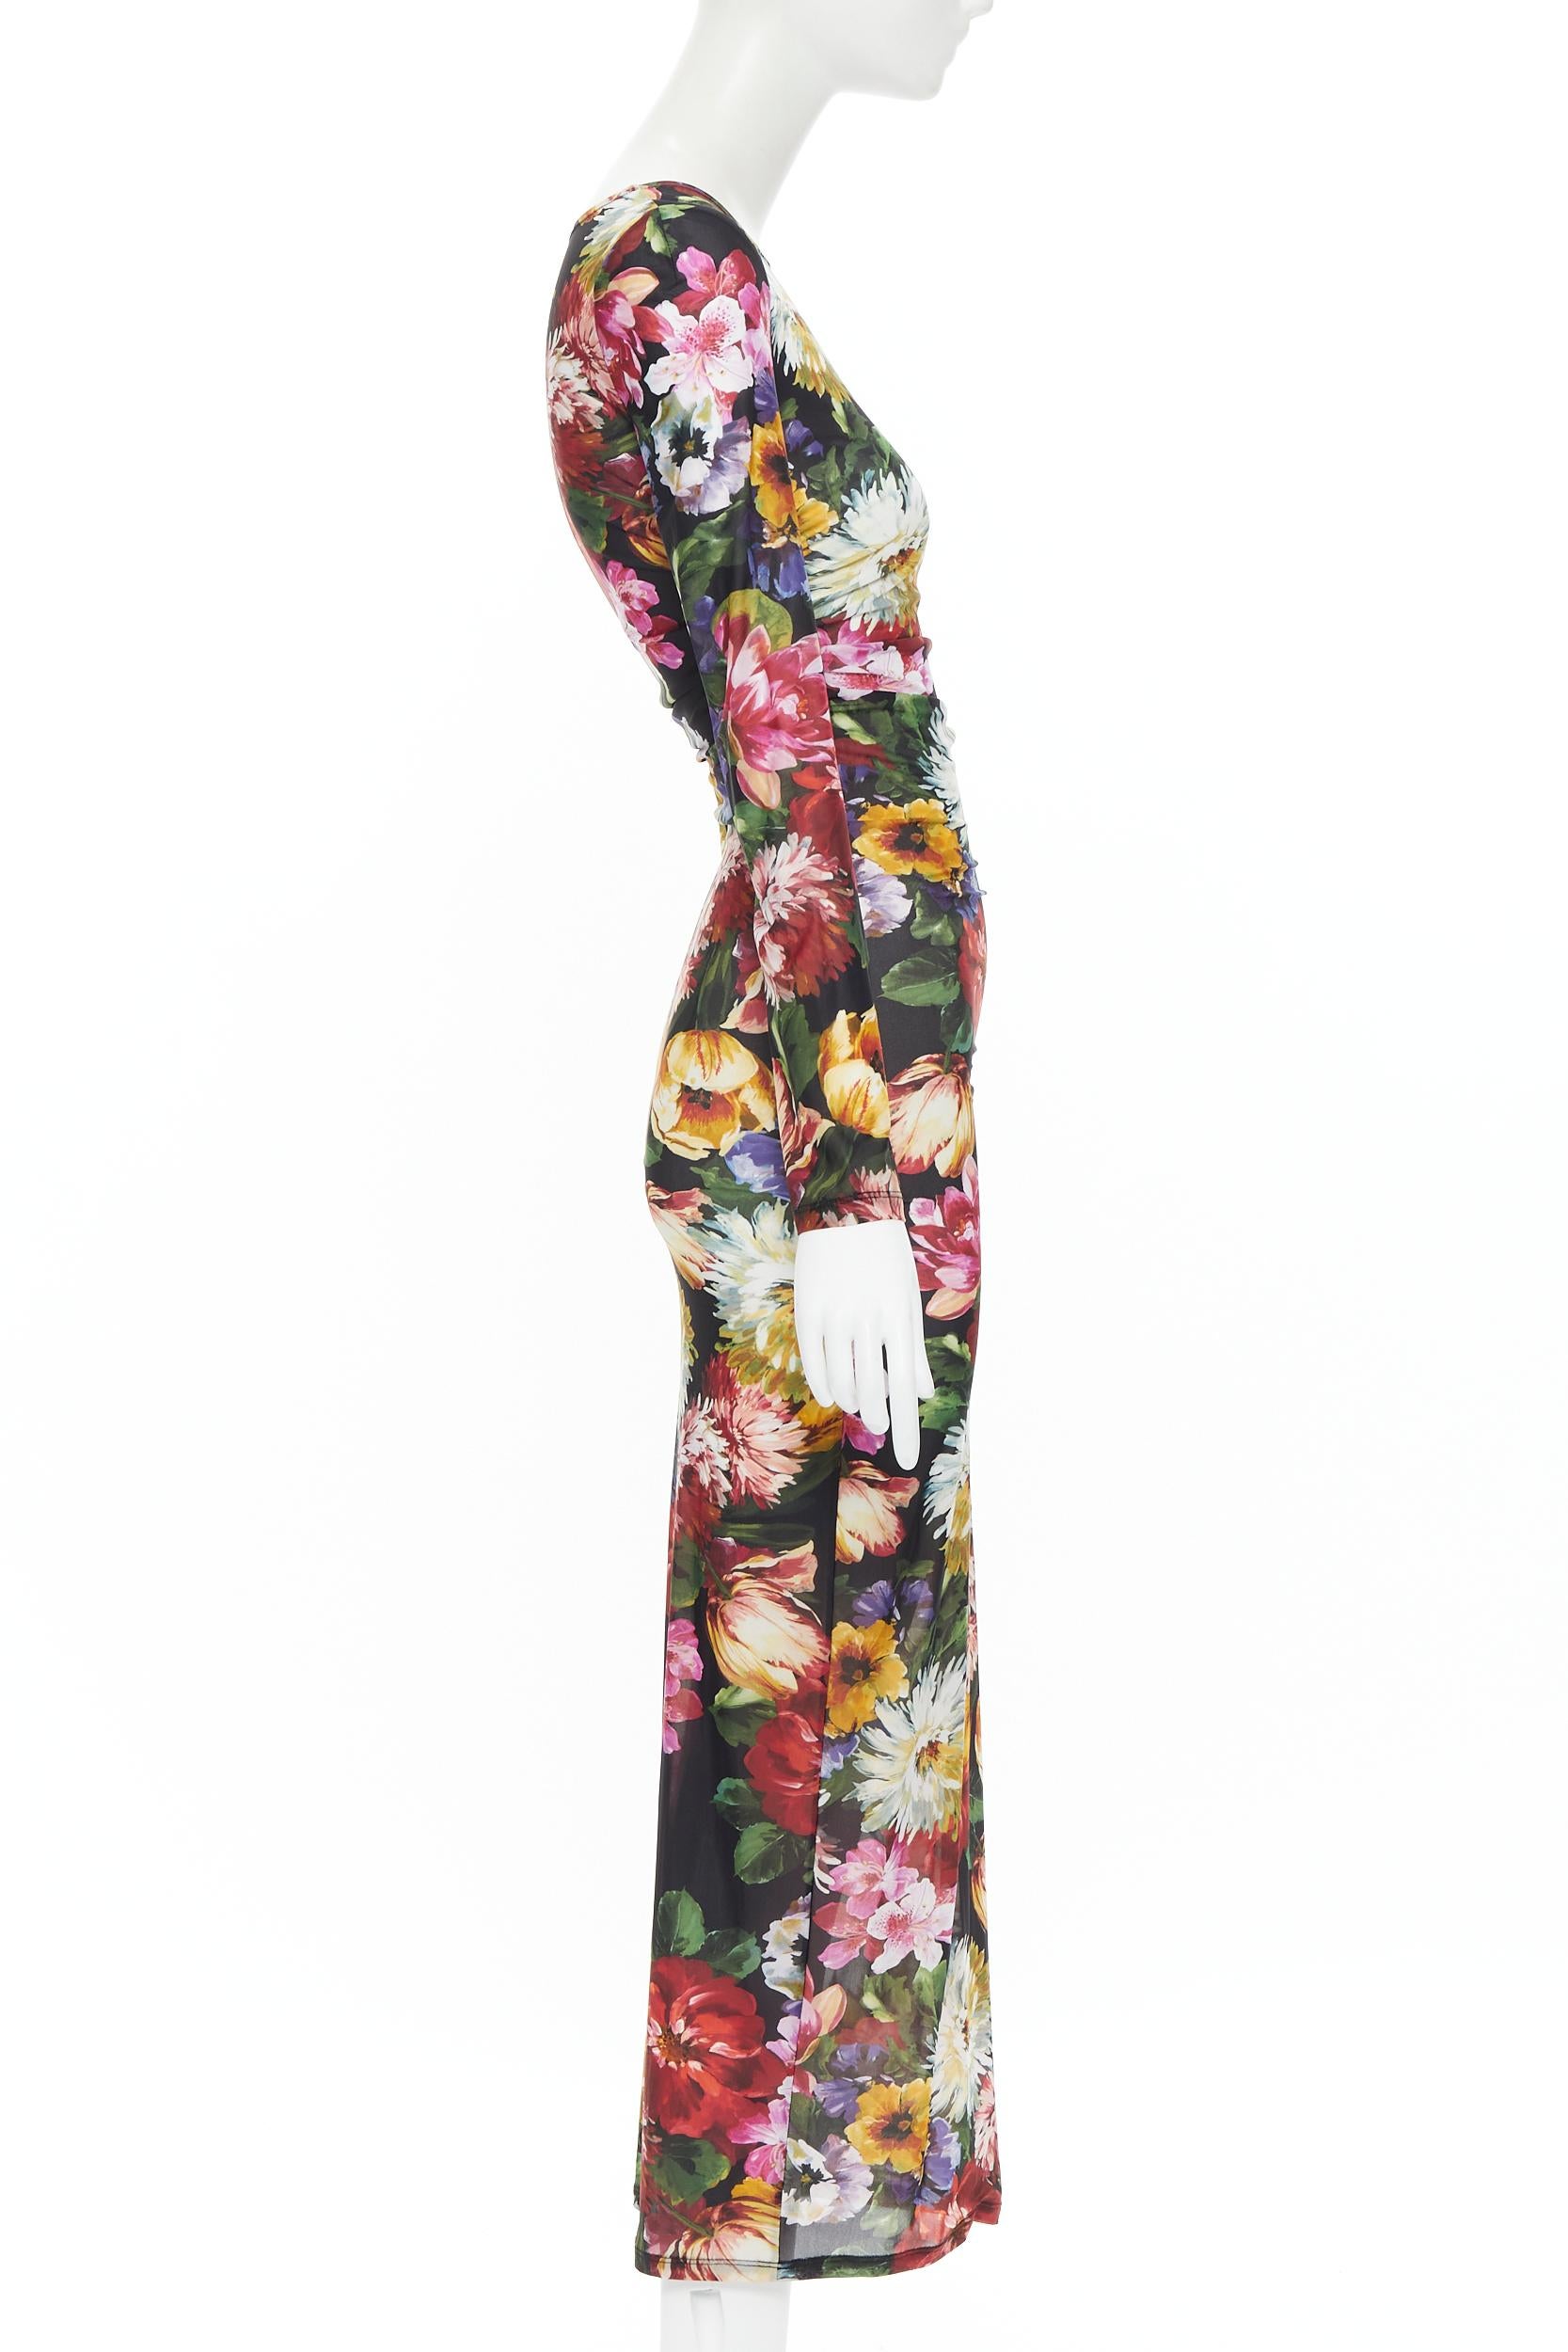 dolce and gabbana long sleeve floral dress